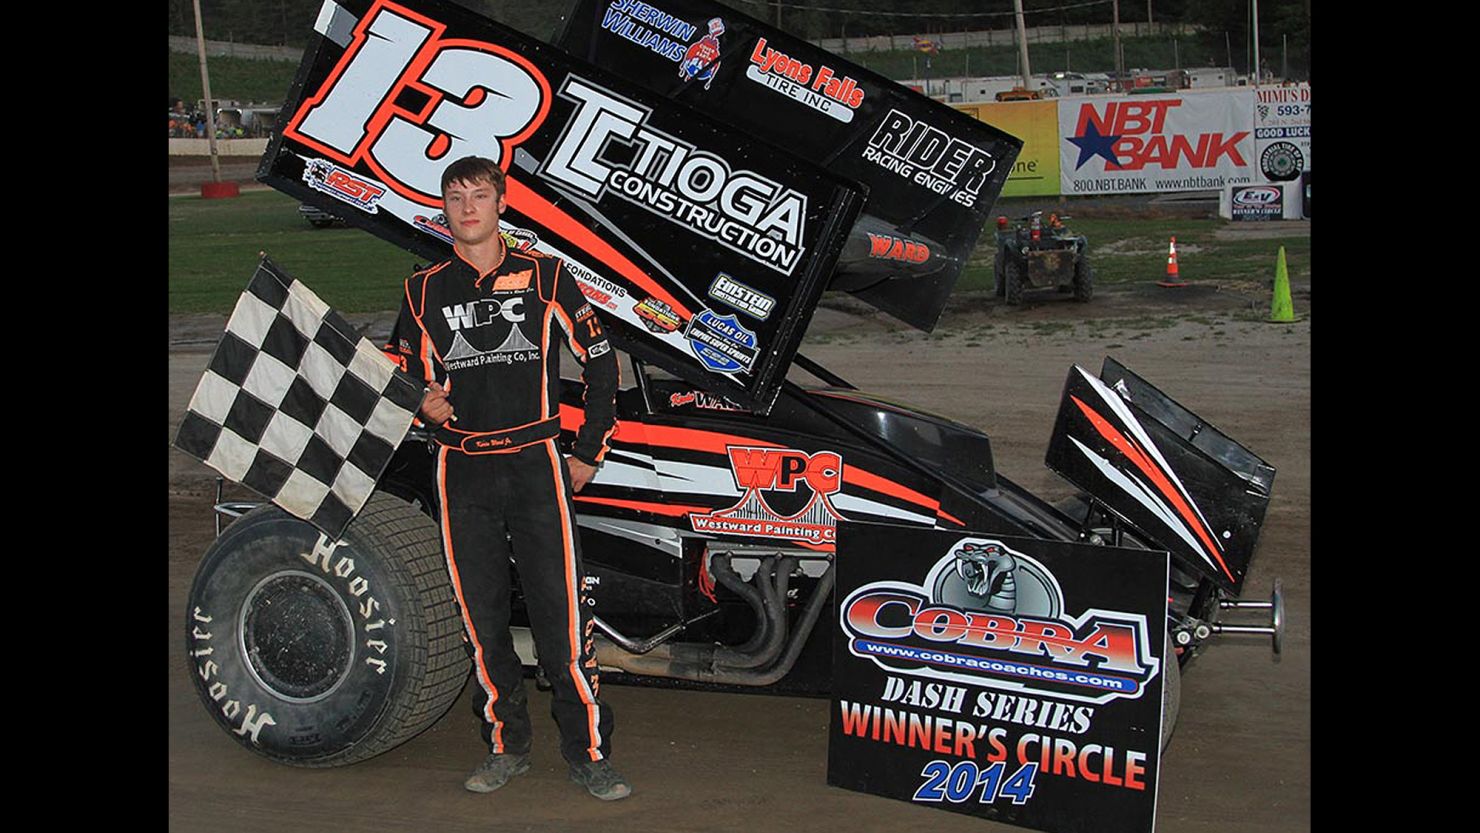 Kevin Ward Jr. in the victory lane with his car in July 2014.